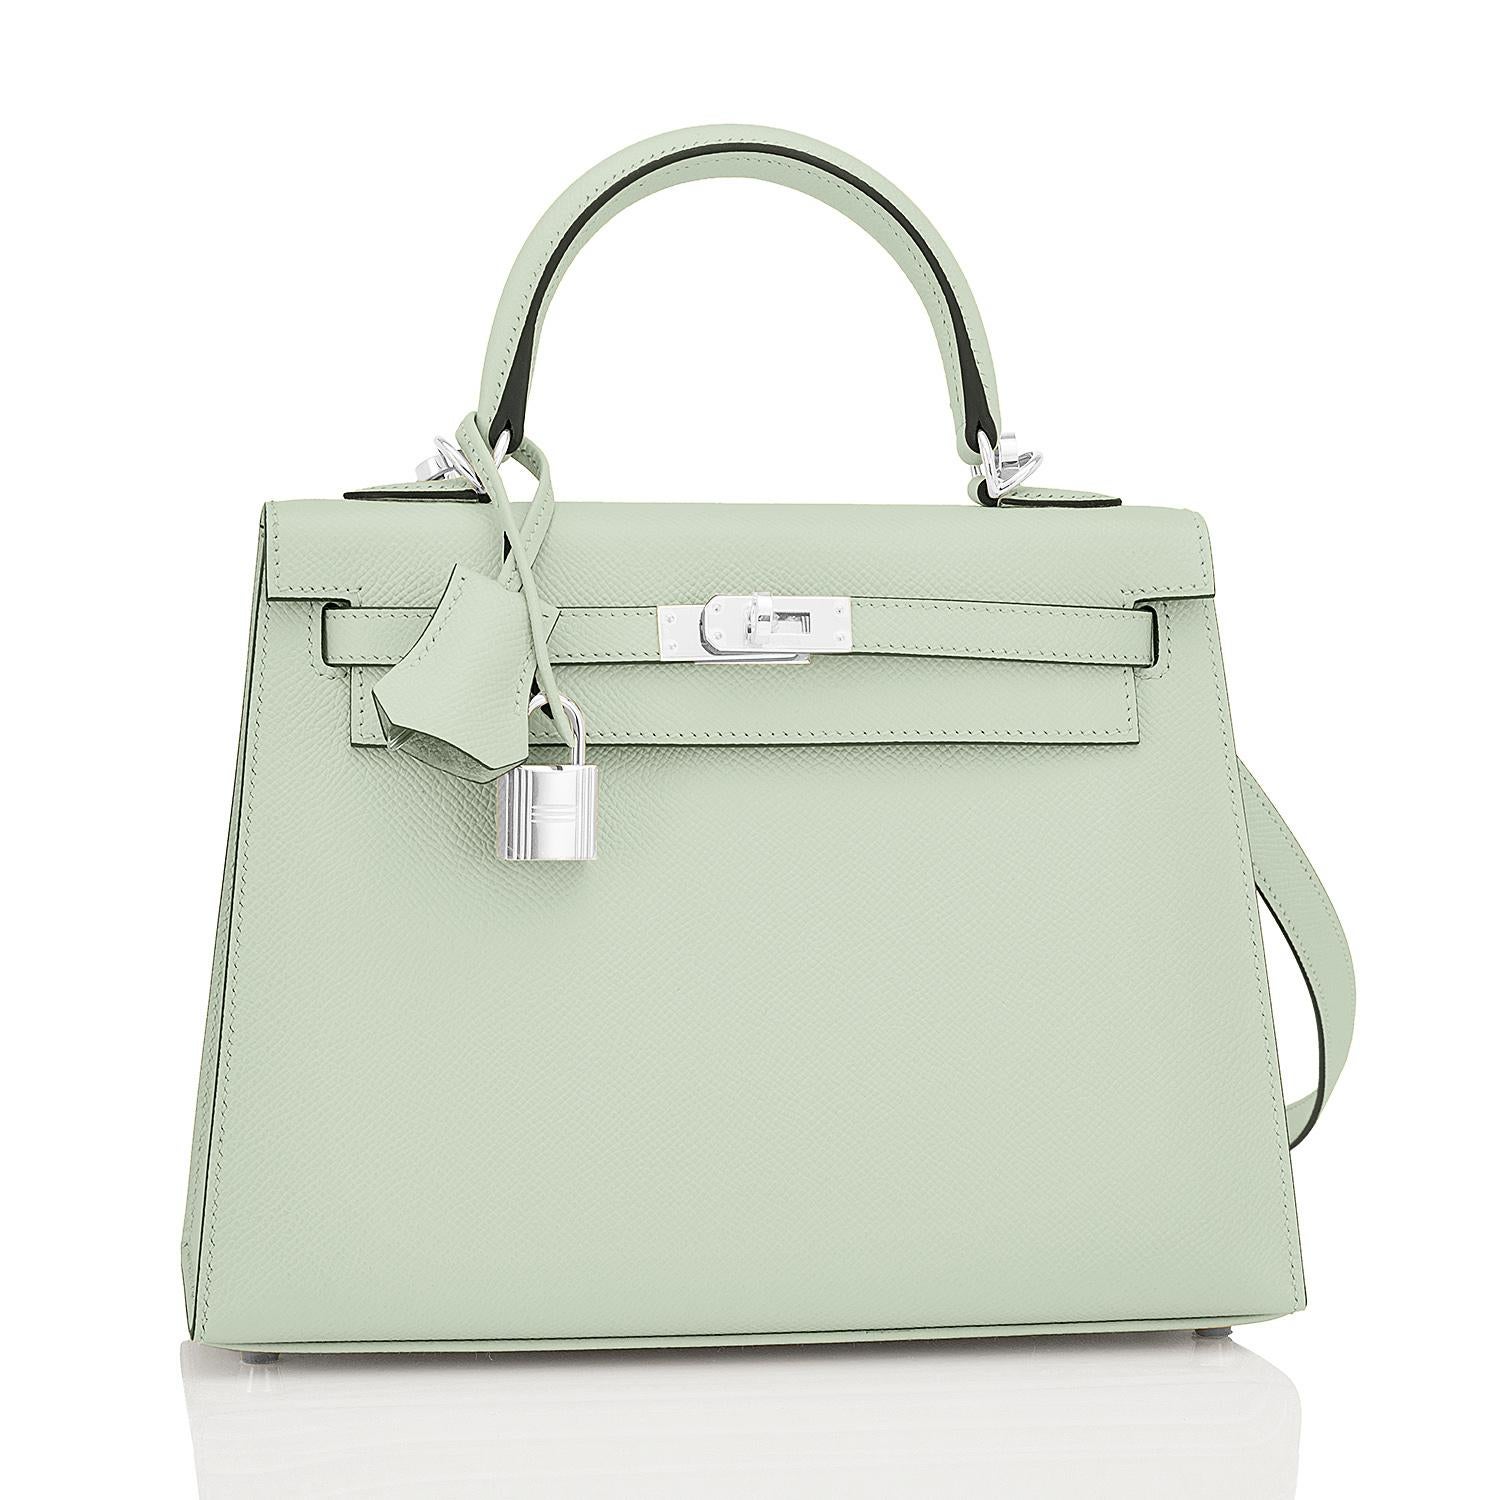 Hermes Kelly 25 Vert Fizz Sellier Epsom D'eau Shoulder Bag U Stamp, 2022
Absolutely and stunningly gorgeous new ethereal green! To die for in person!
Just purchased from Hermes store. Bag bears new interior 2022 U stamp.
Brand New in Box. Store